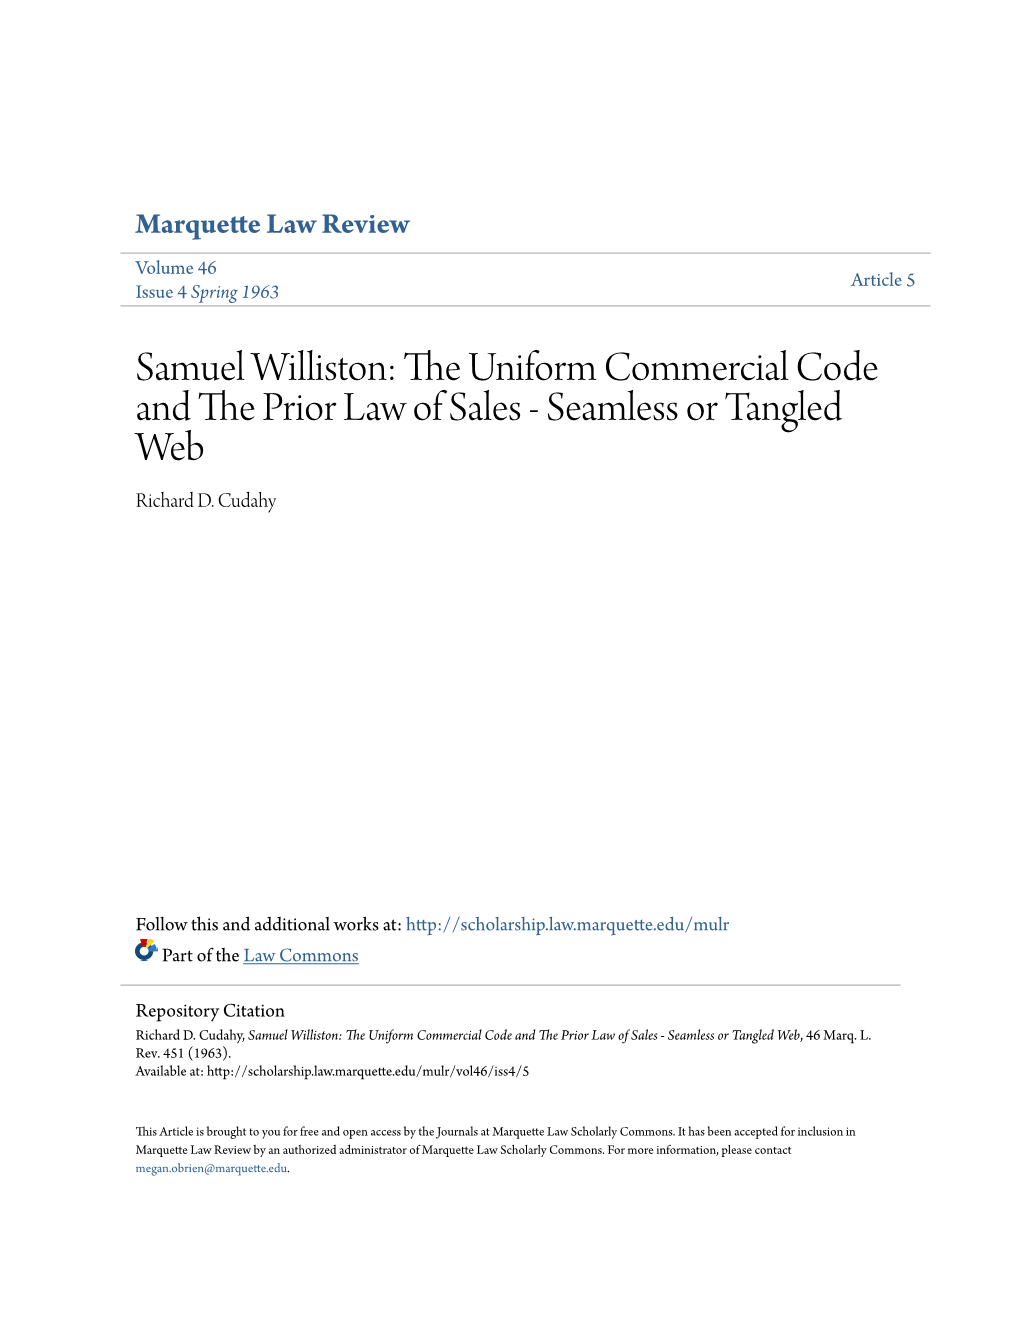 Samuel Williston: the Uniform Commercial Code and the Prior Law of Sales - Seamless Or Tangled Web, 46 Marq